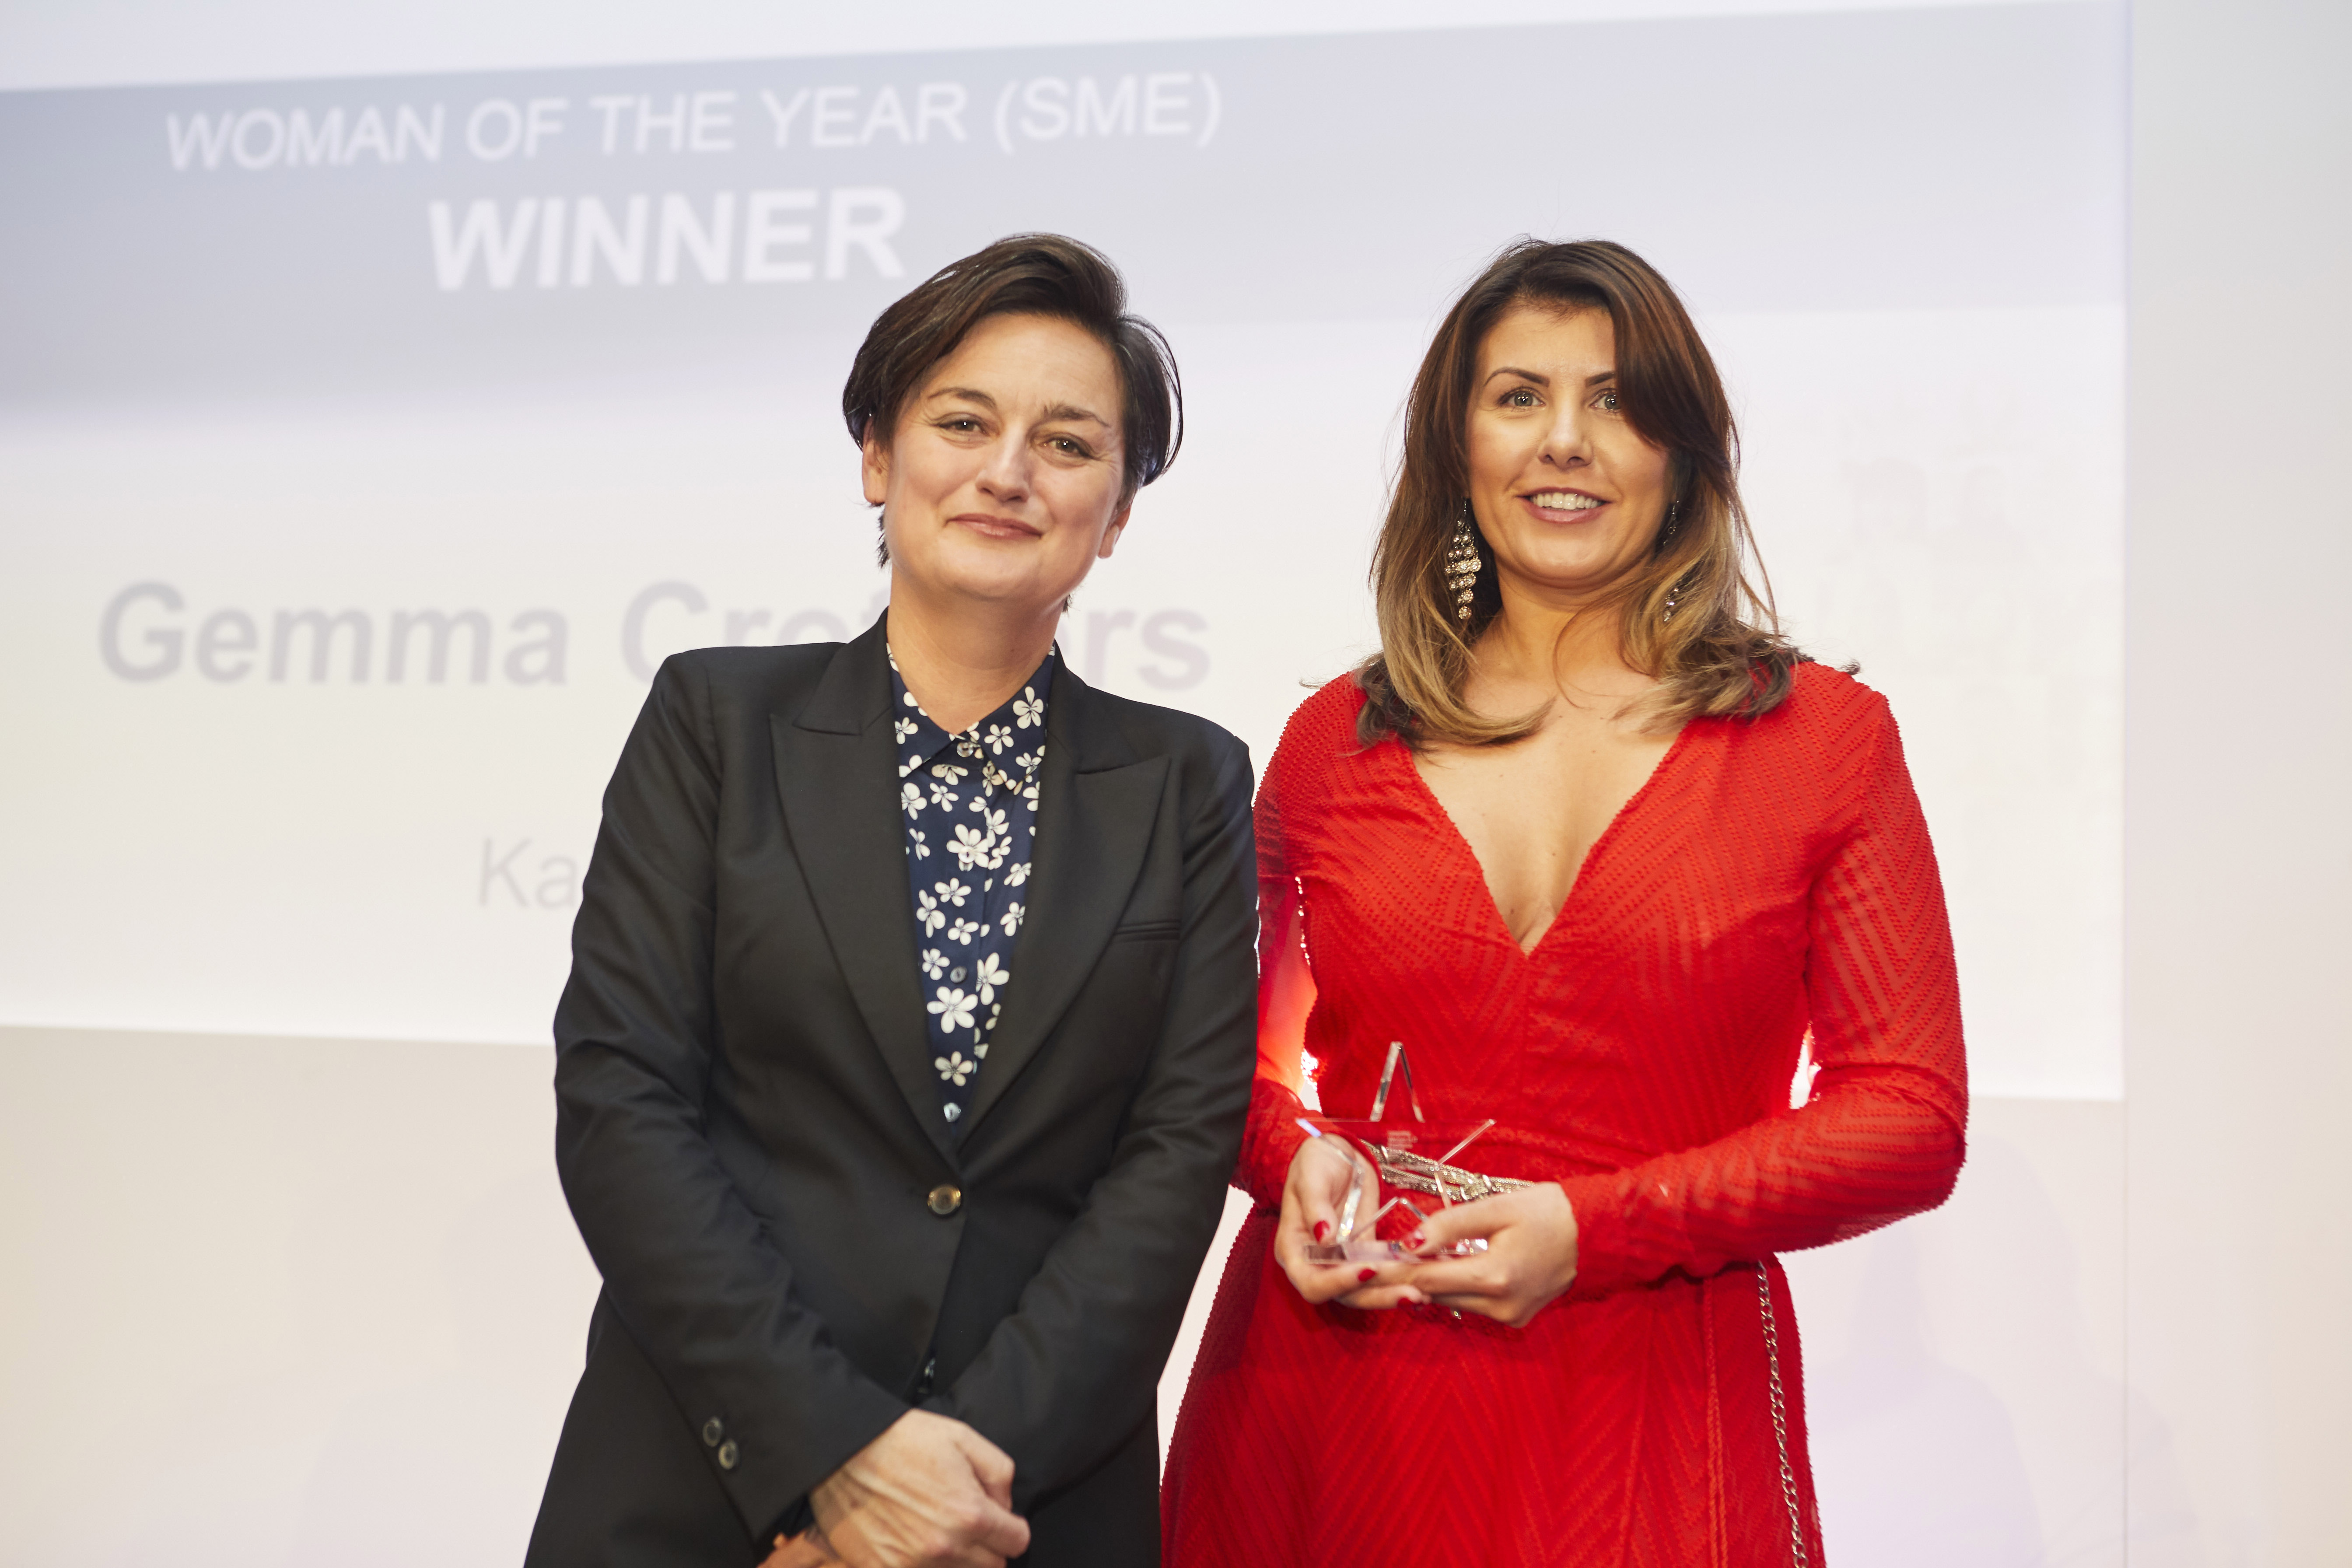 Kainos Tech Outreach Manager scoops UK ‘Woman of the Year’ title at IT Excellence Awards